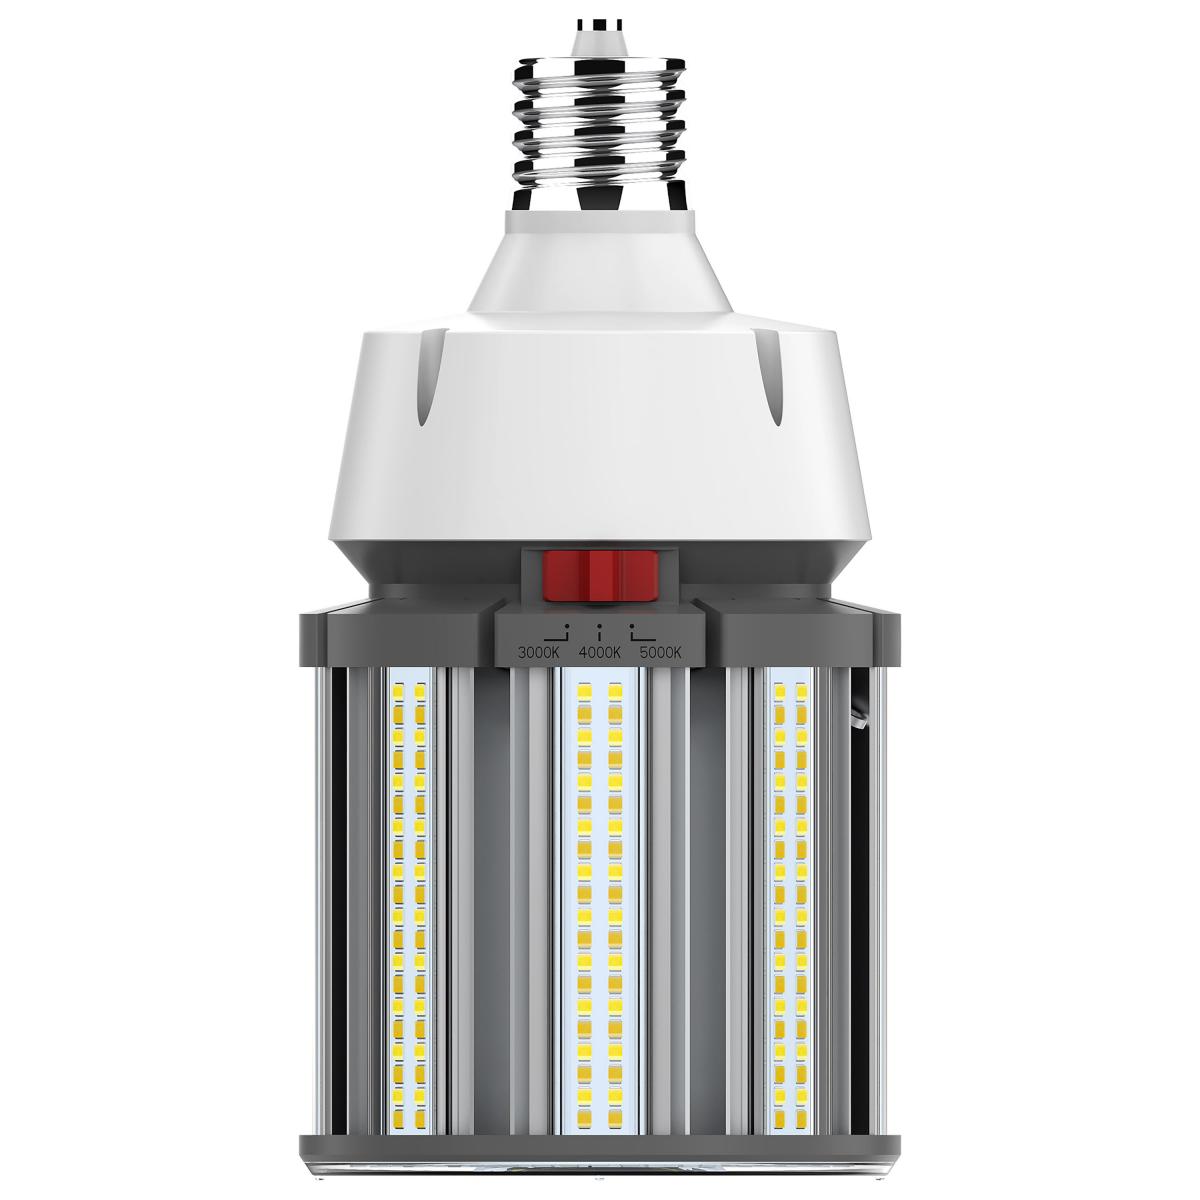 Satco S23167 80 Watt LED HID Replacement CCT Selectable Mogul Extended Base 277-480 Volt ColorQuick Technology